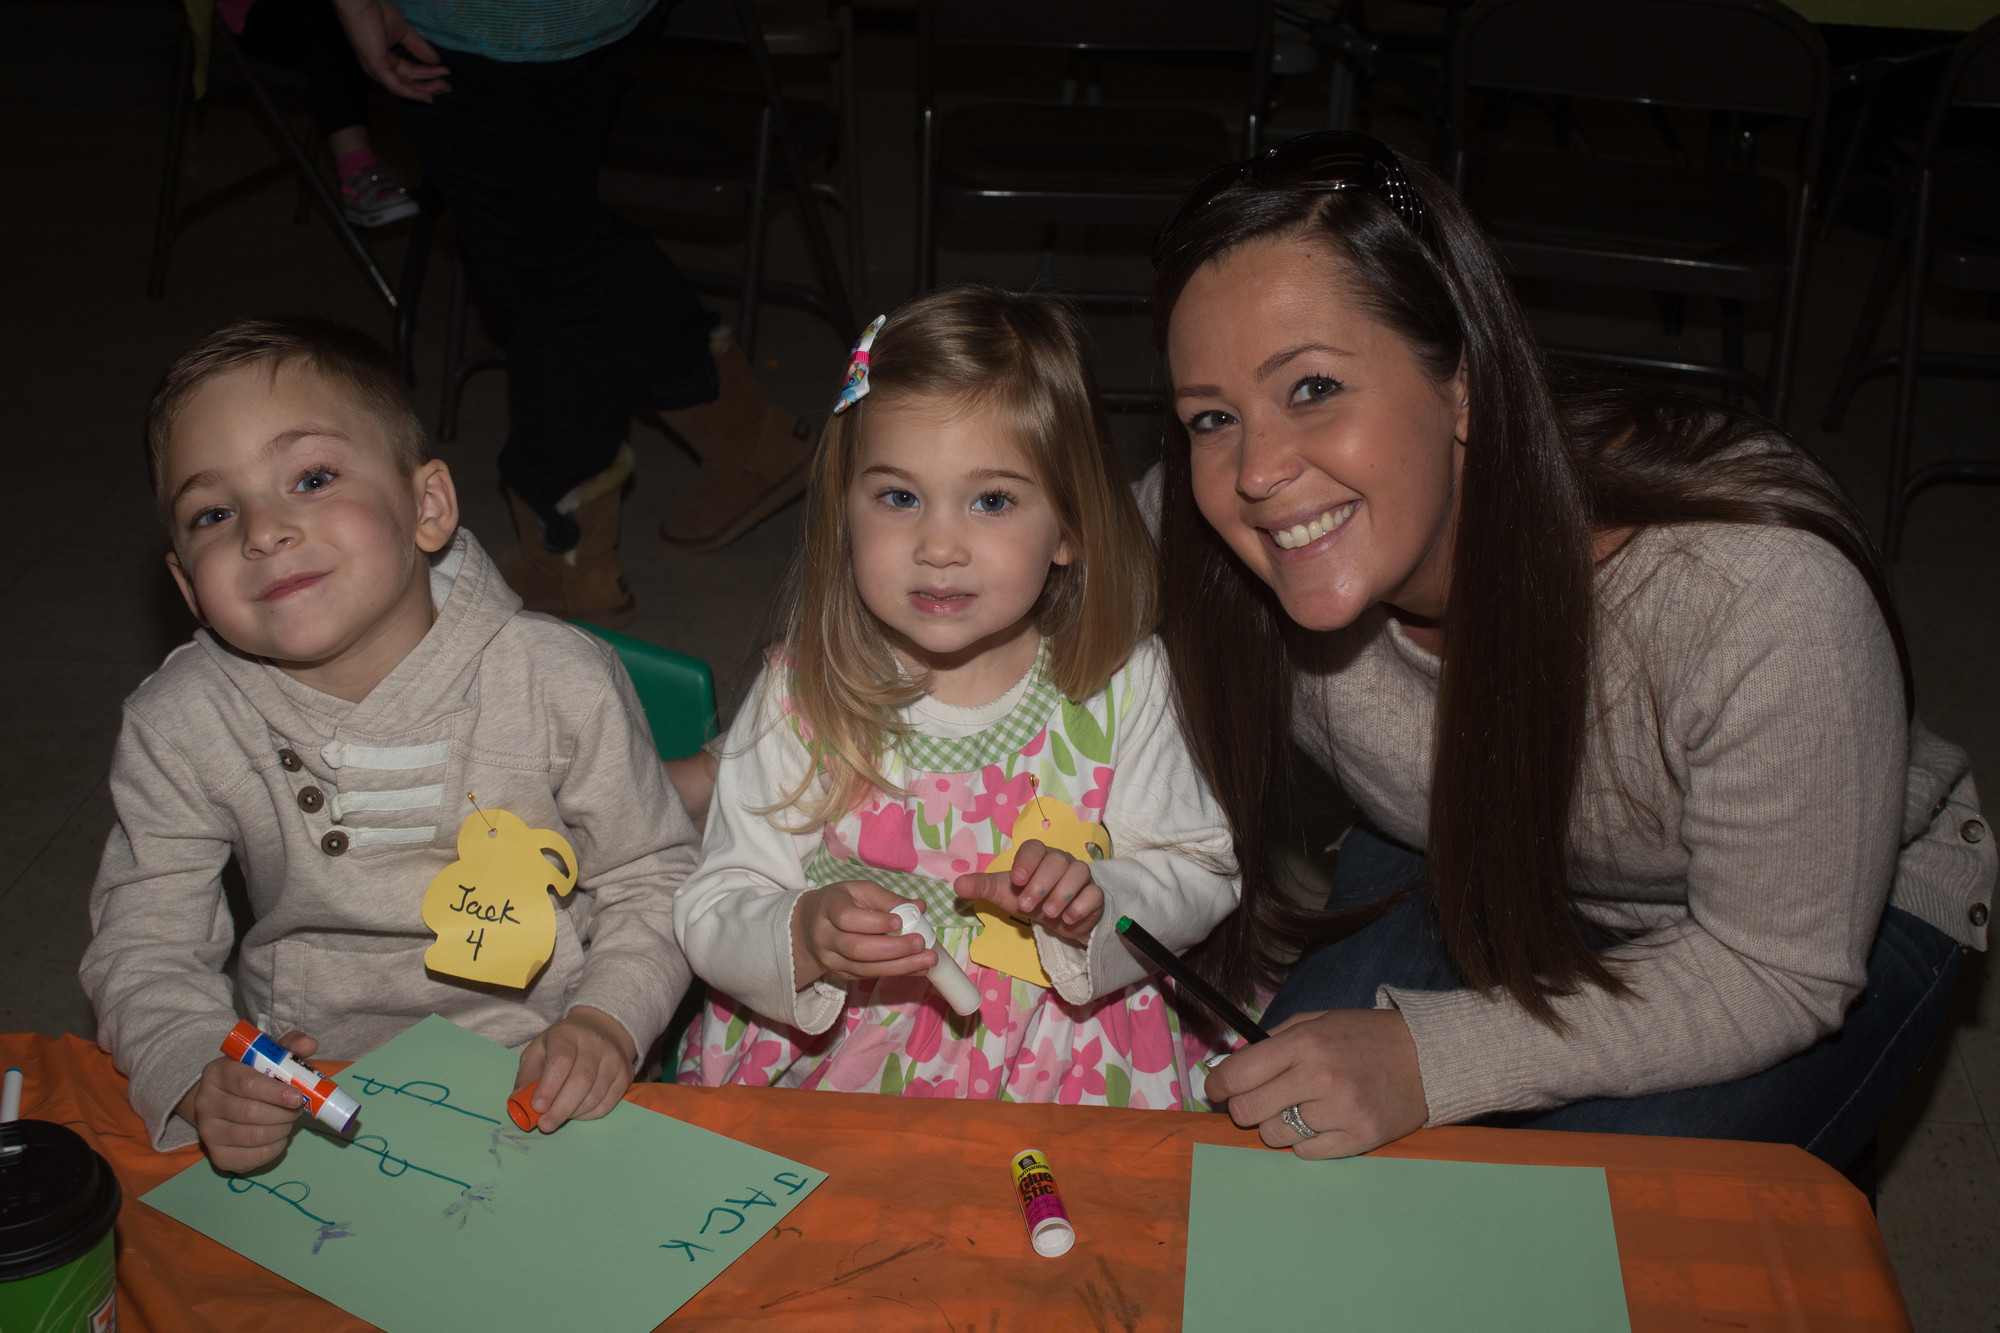 There were smiles on the faces of Jack, 4, Sarah, 3, and Patti Hotzetz.